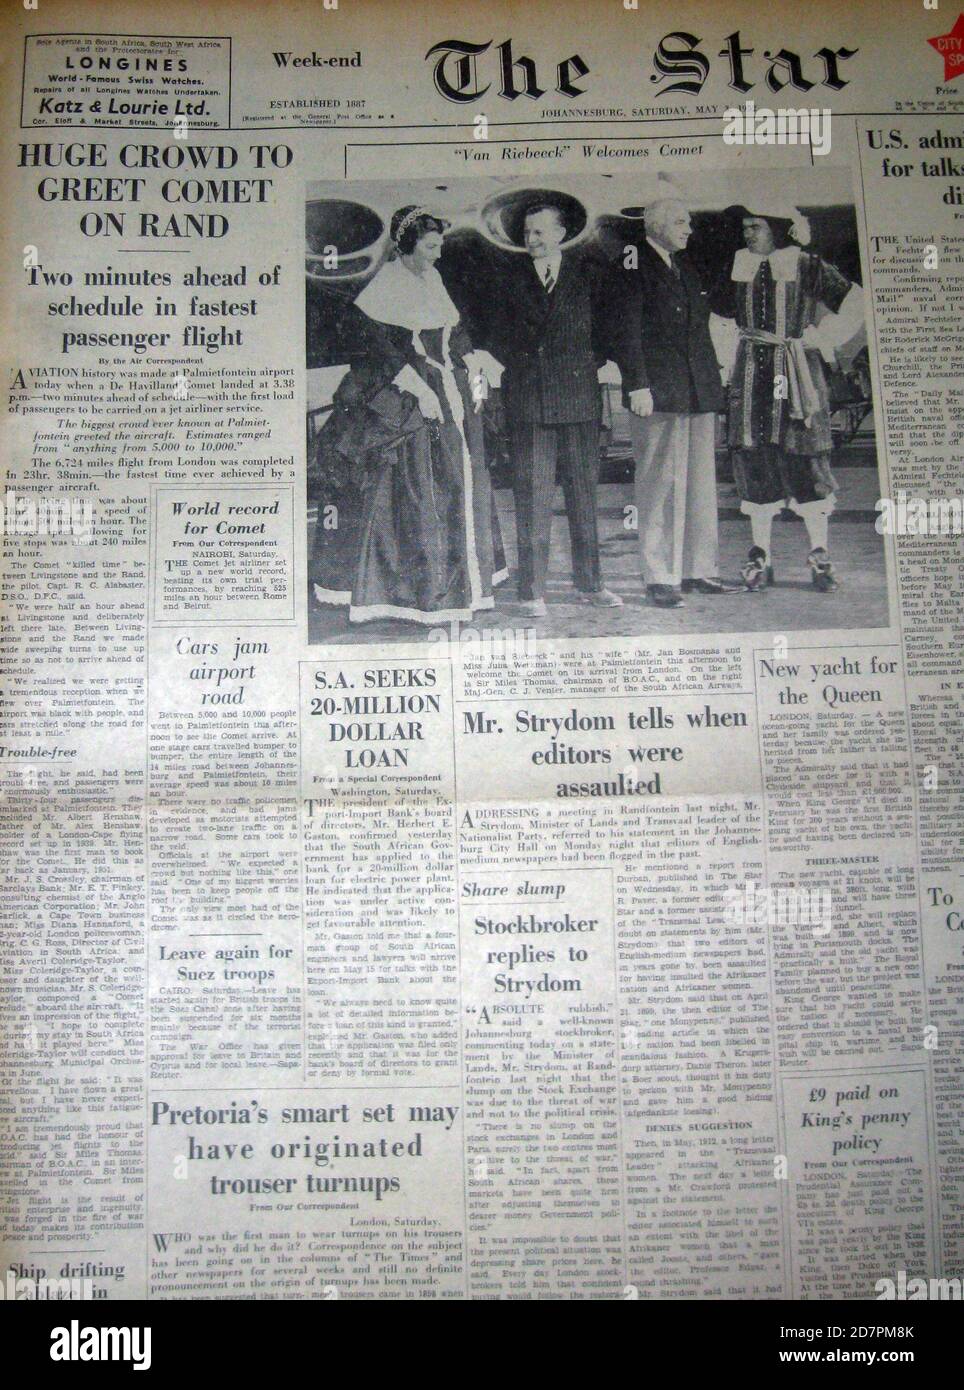 South Africa History Newspaper Article Published In The Star Of May 3rd 1952 Regarding The World S First Commercial Jet Flight Which Took Place From London To Palmietfontein Airport In Johannesburg South Africa